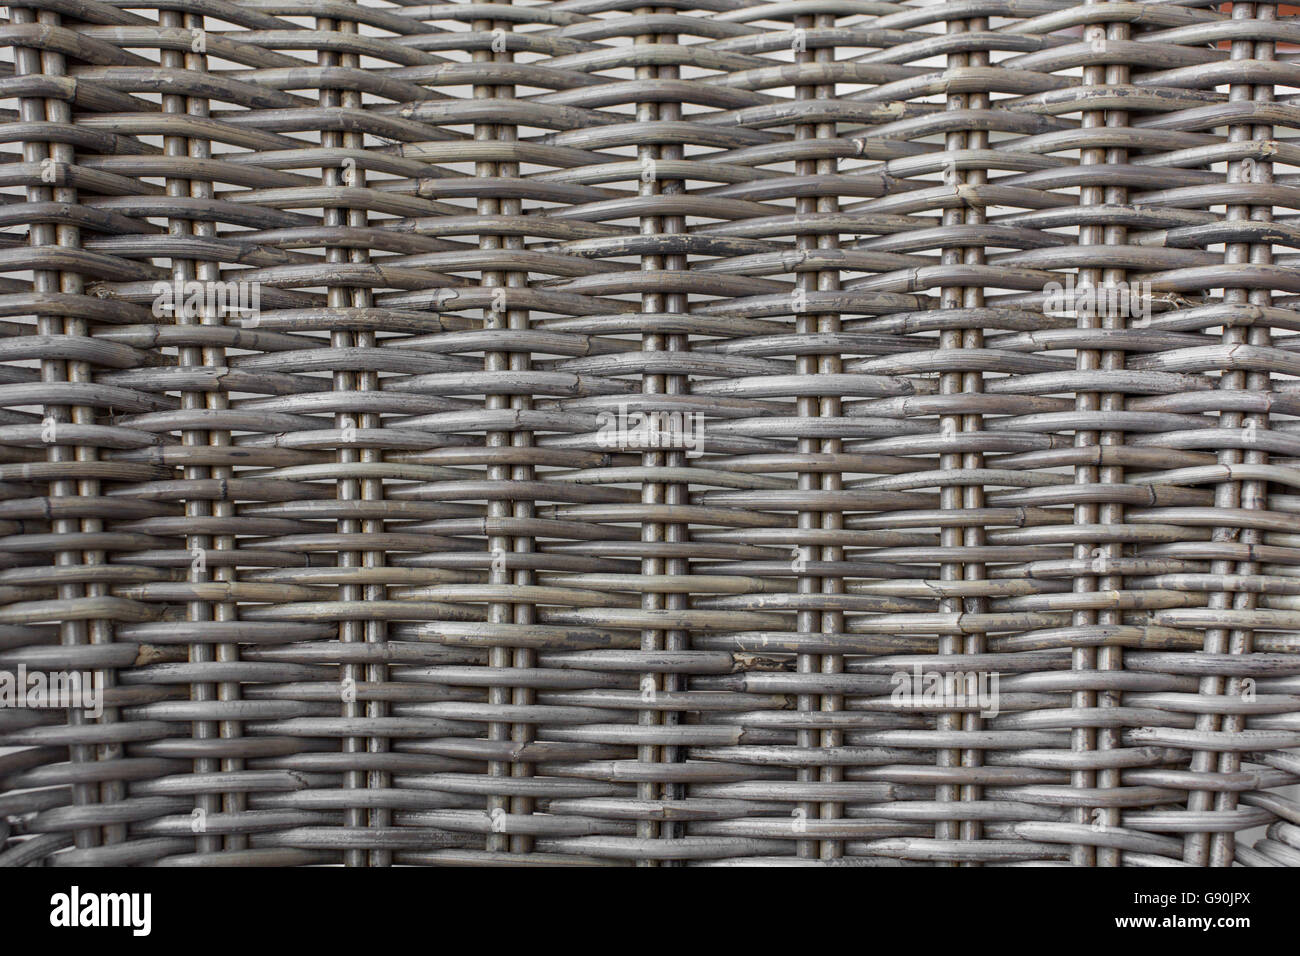 Rattan gray wooden texture, natural patterns Stock Photo